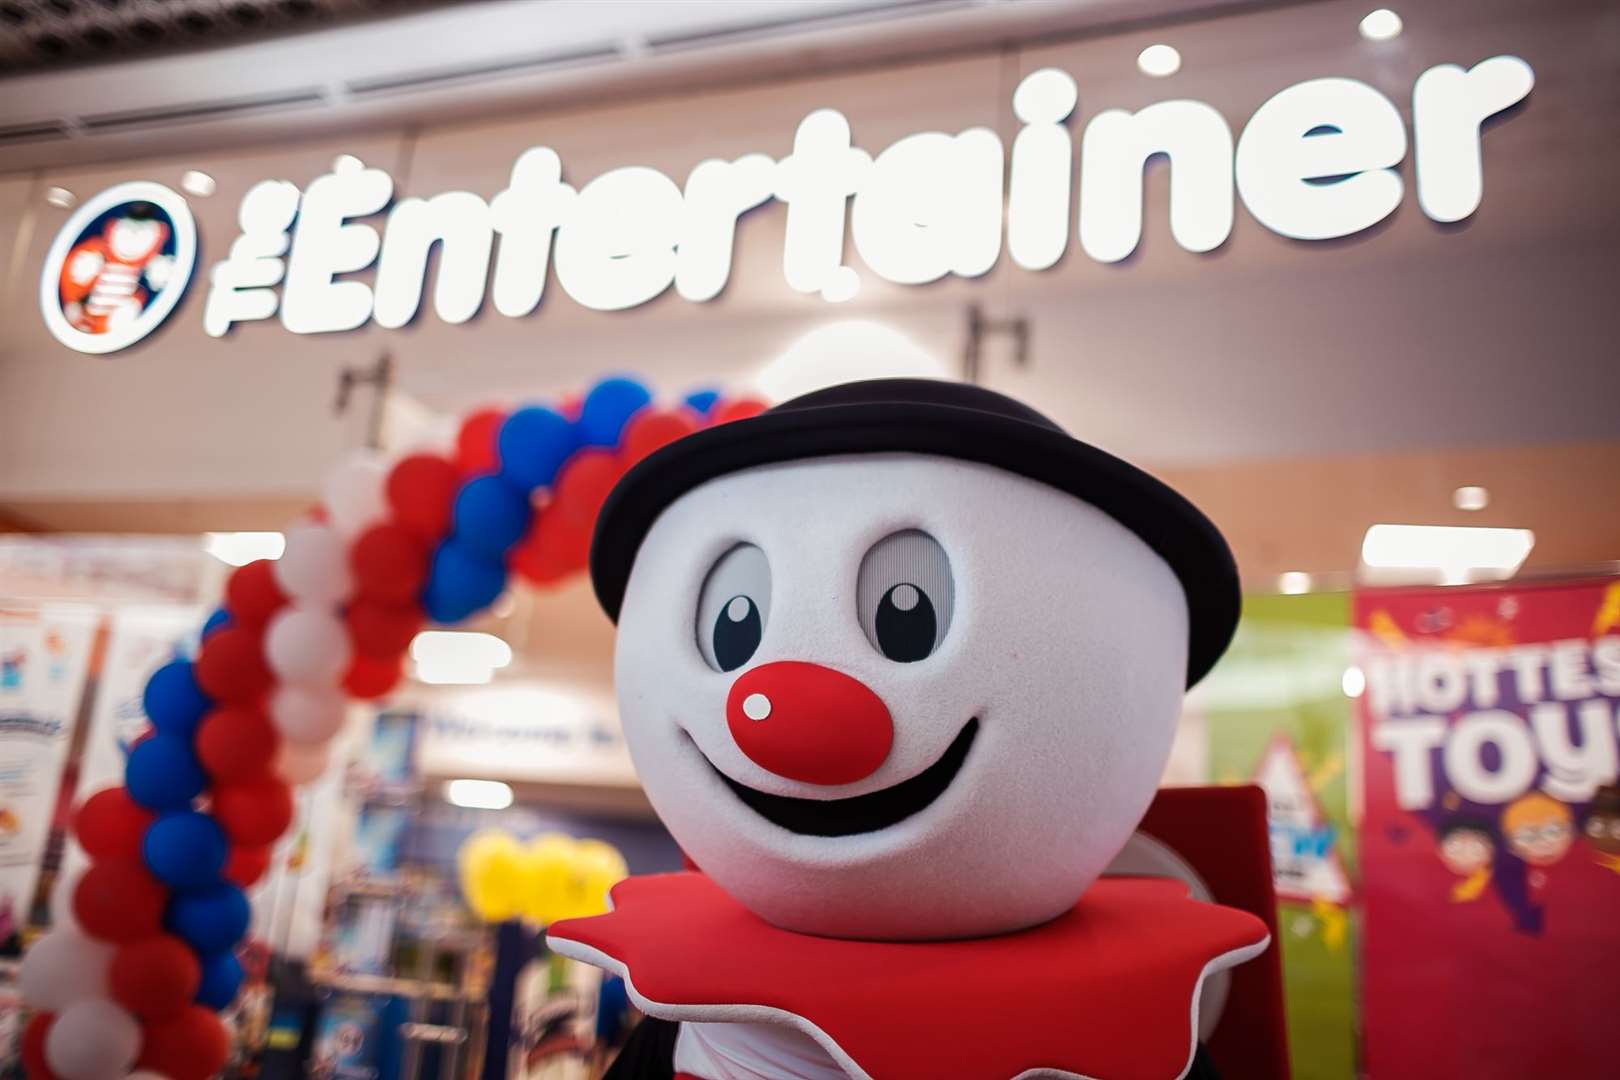 The Entertainer is rolling out Quiet Hour to all of its stores every day